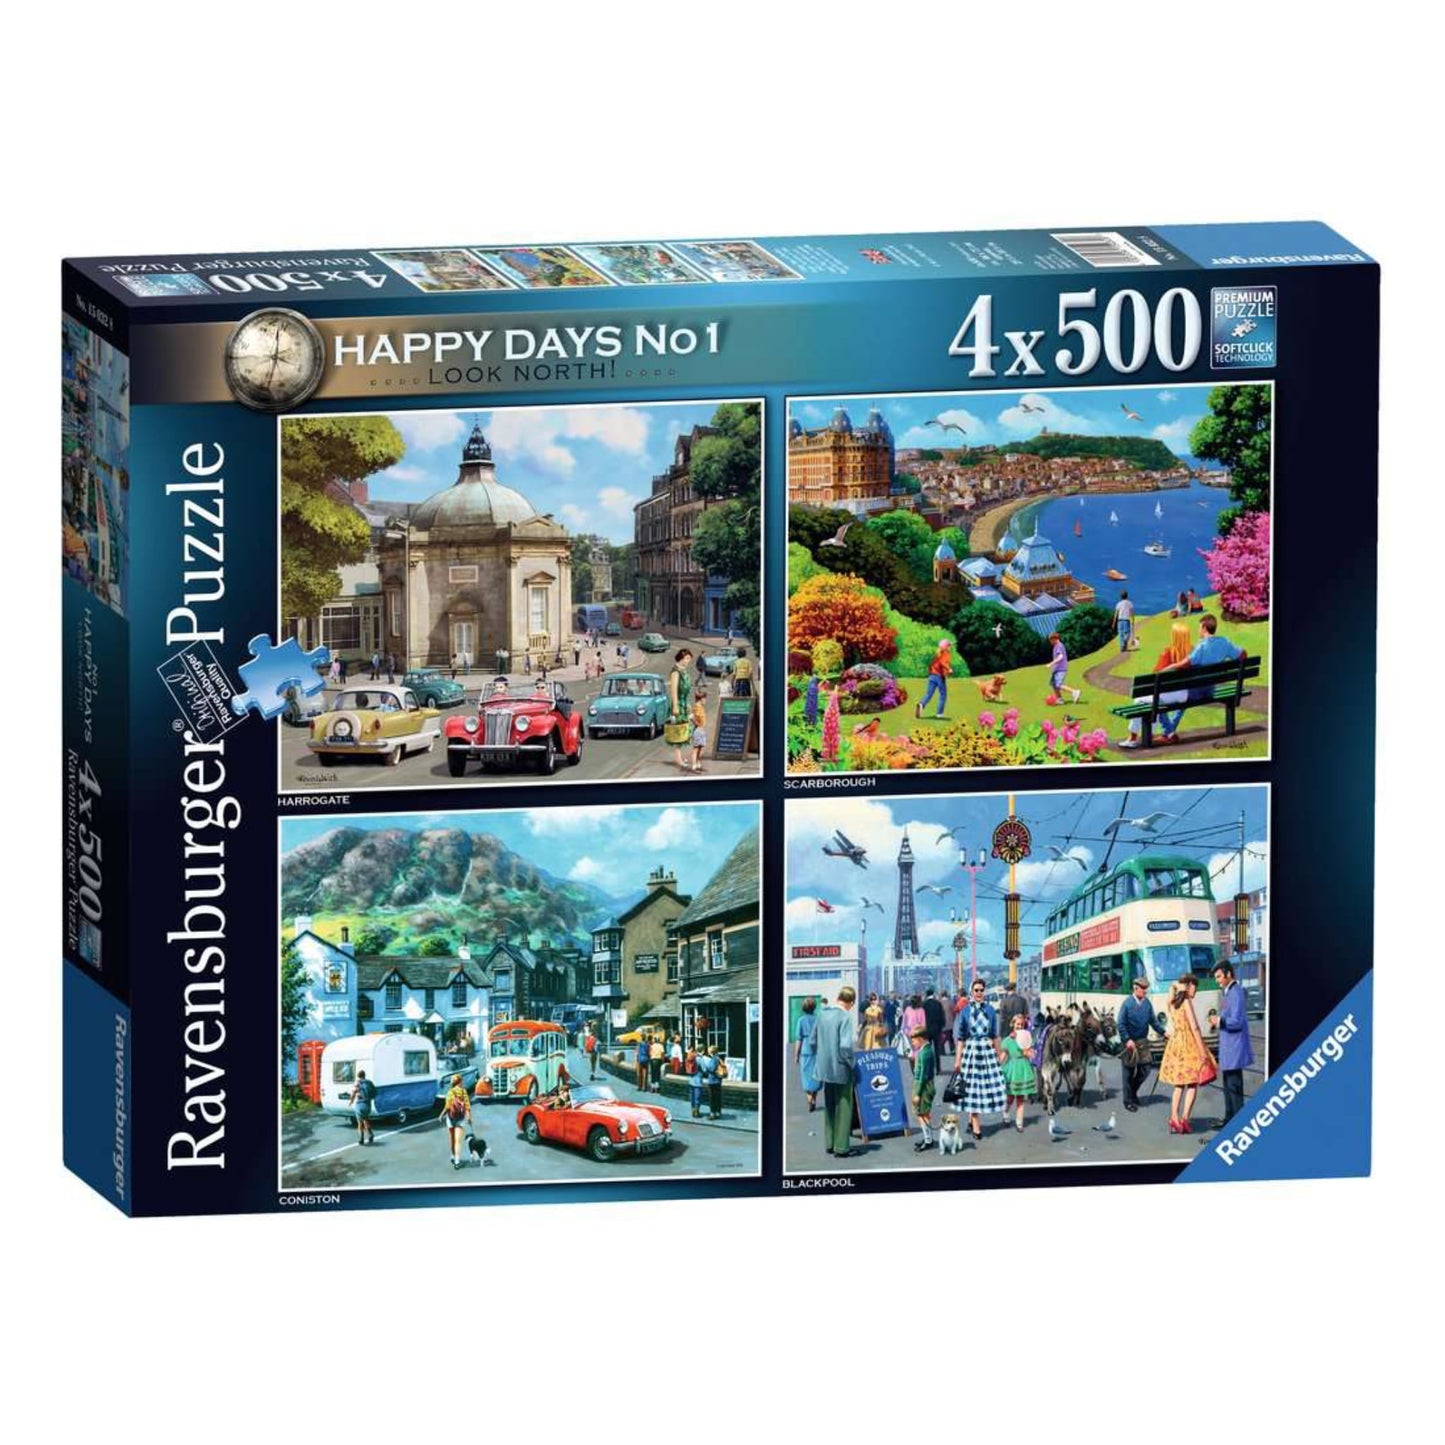 The Yorkshire Jigsaw Store